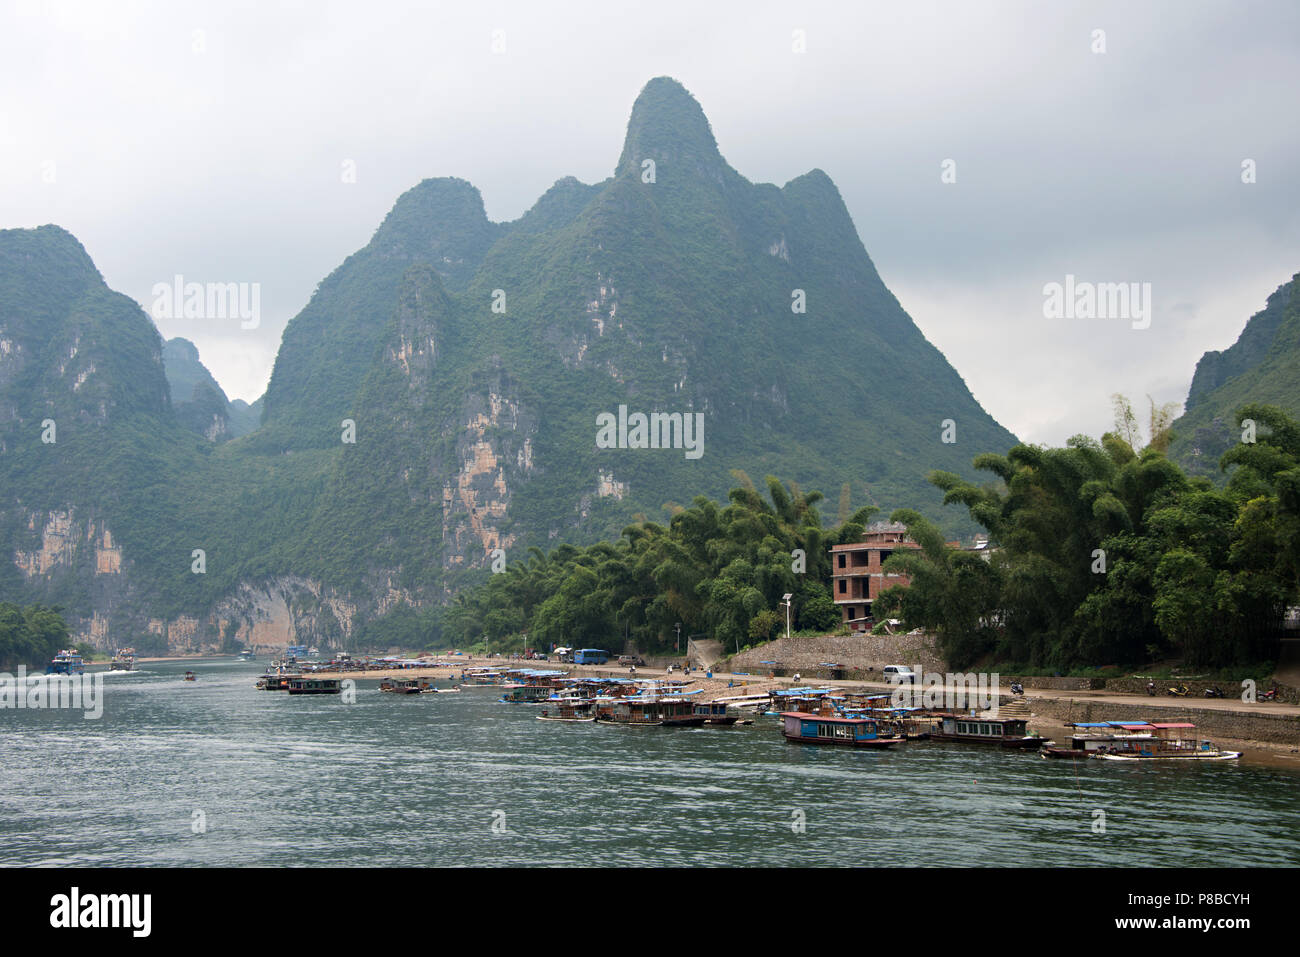 River cruise on the Li River in Guangxi Zhuang china, on the journey from Guilin to Yangshuo. Stock Photo